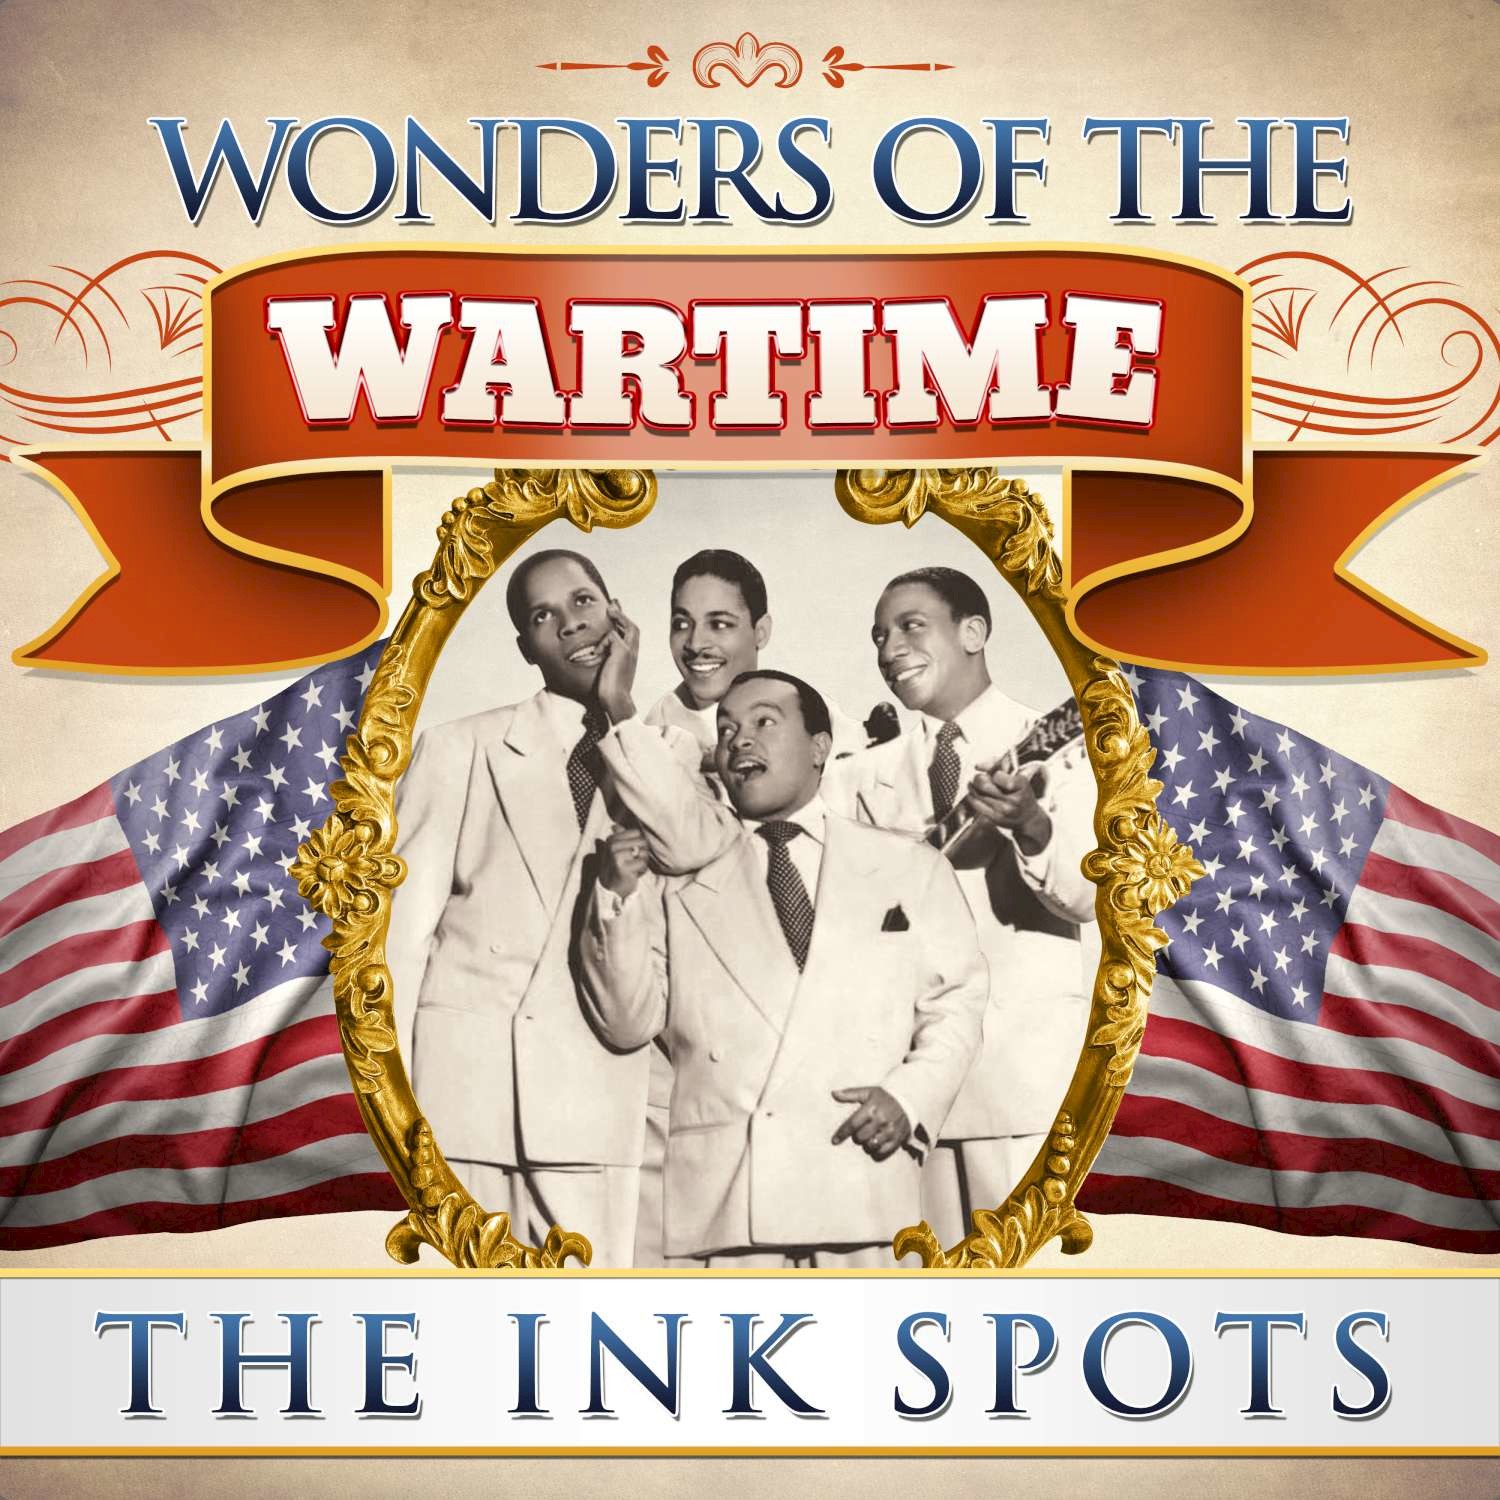 Wonders of the Wartime: The Ink Spots